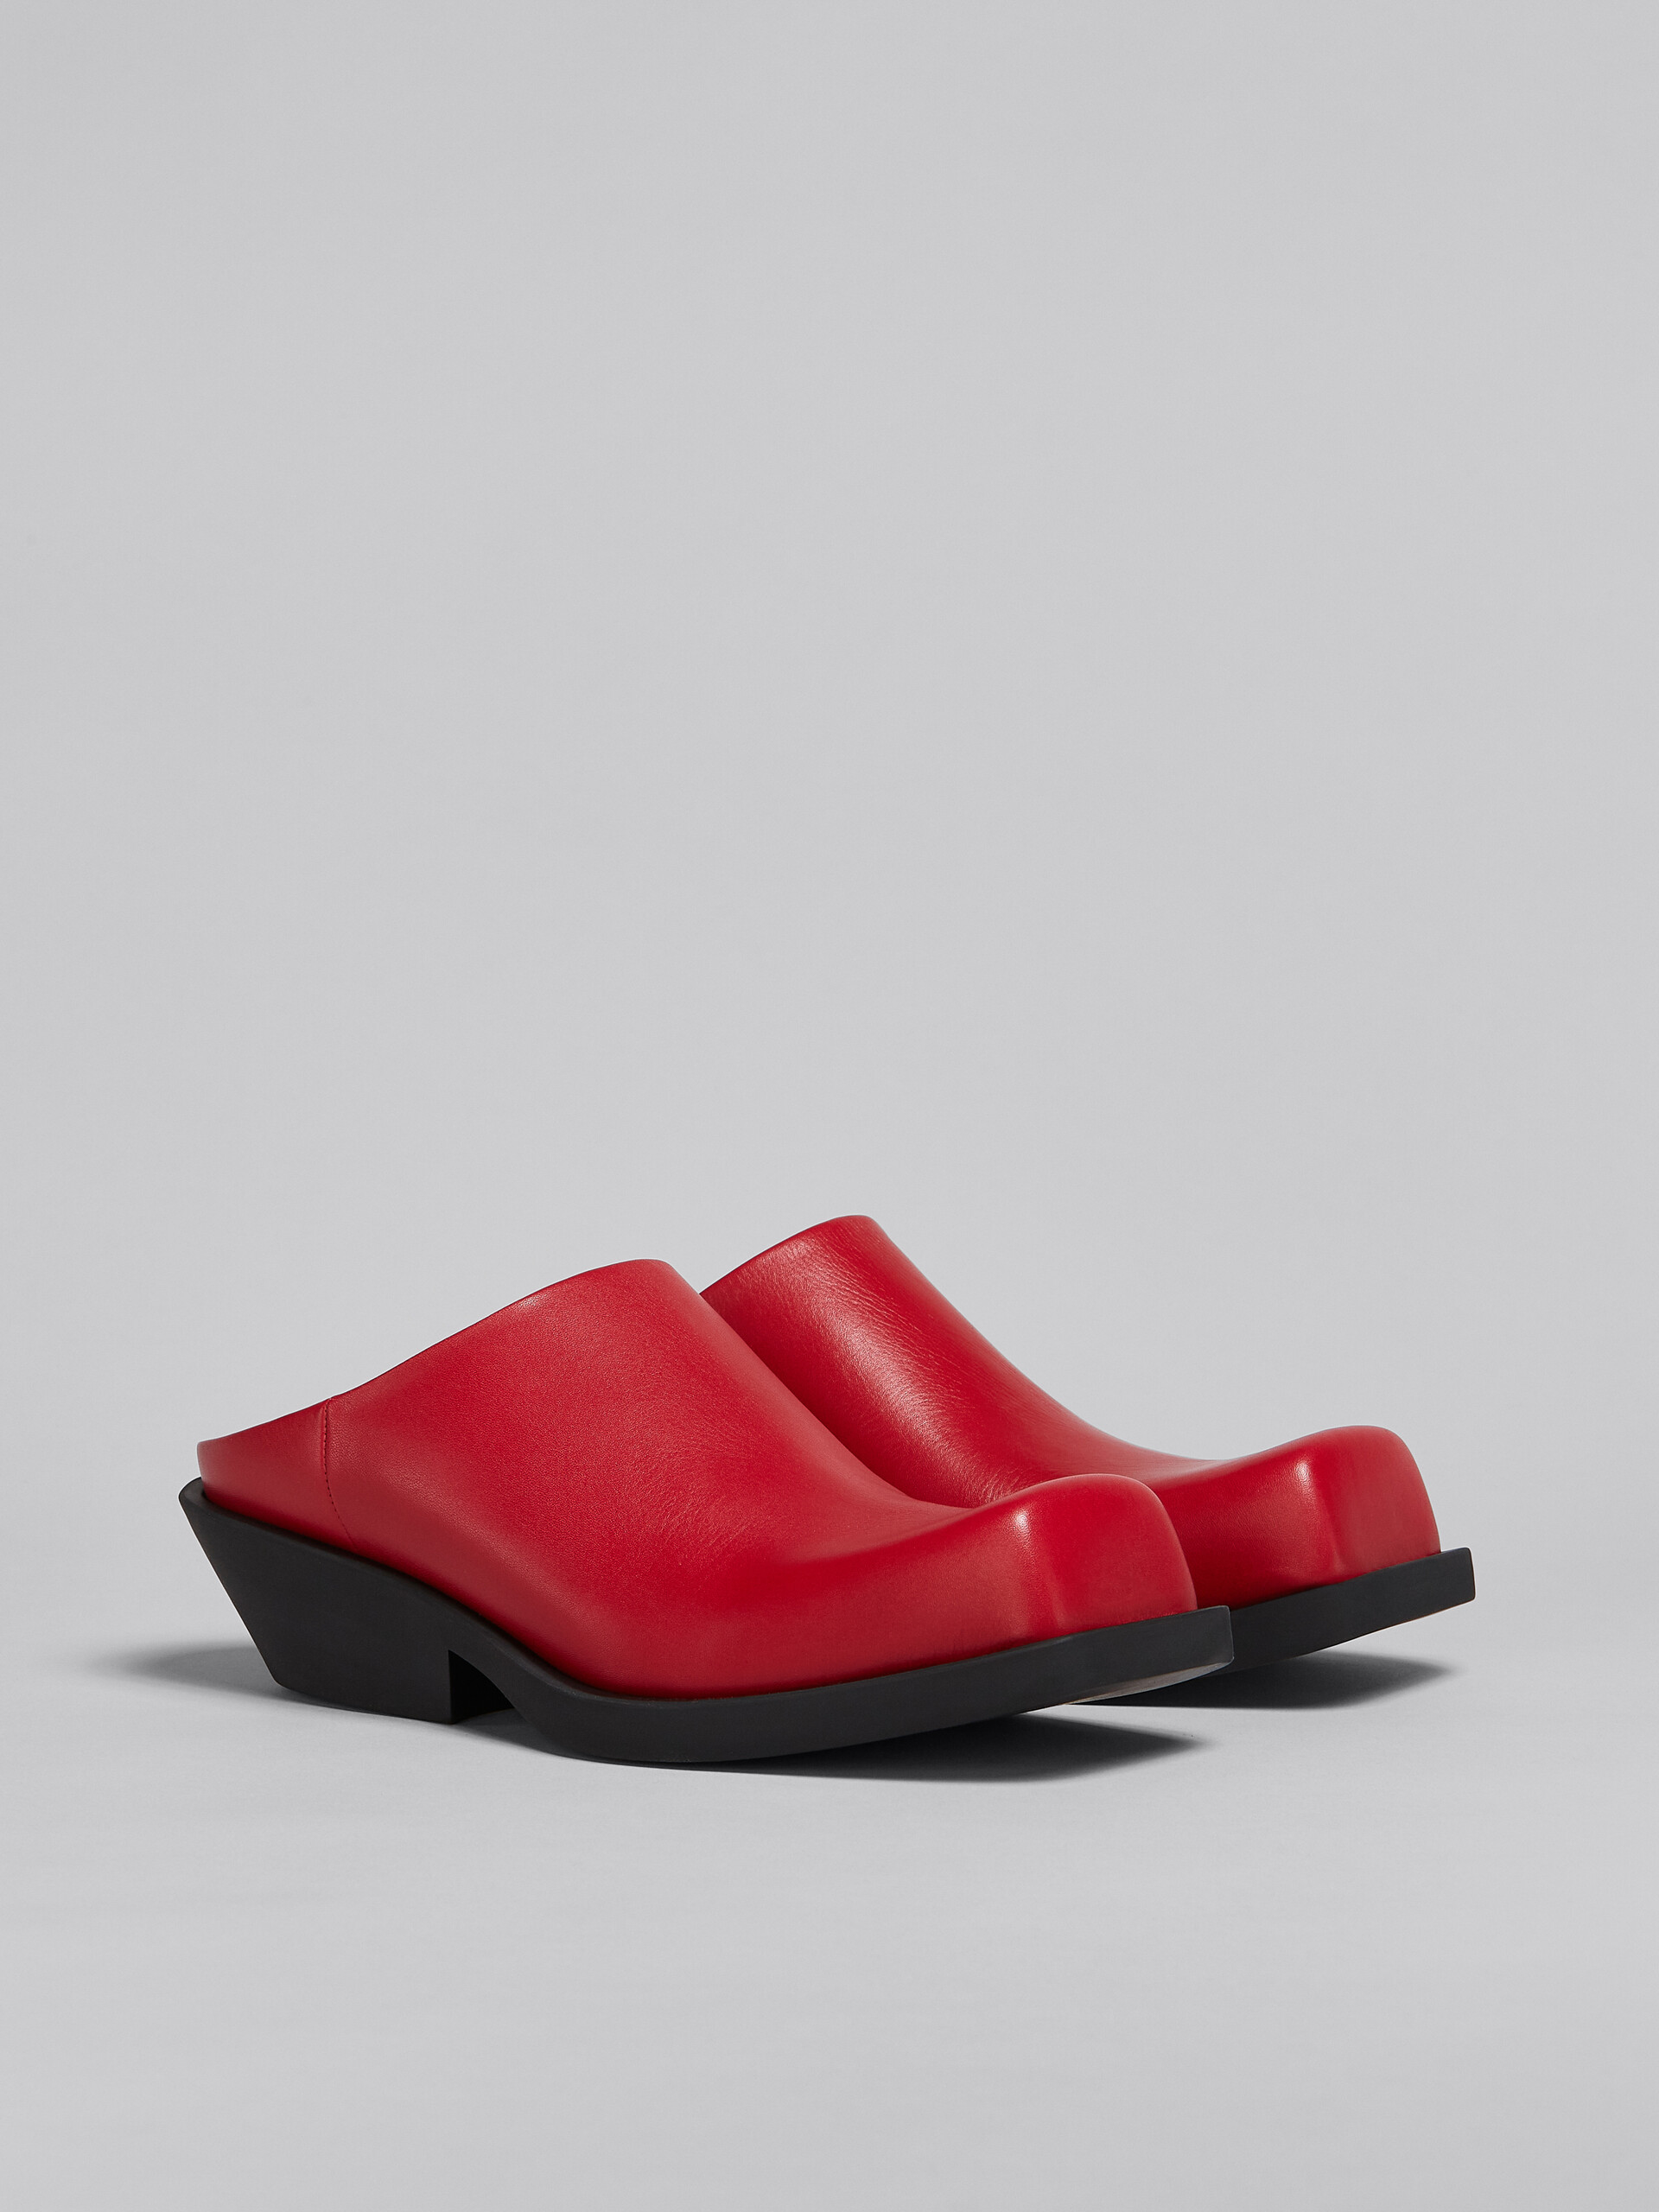 Red leather sabot - Clogs - Image 2